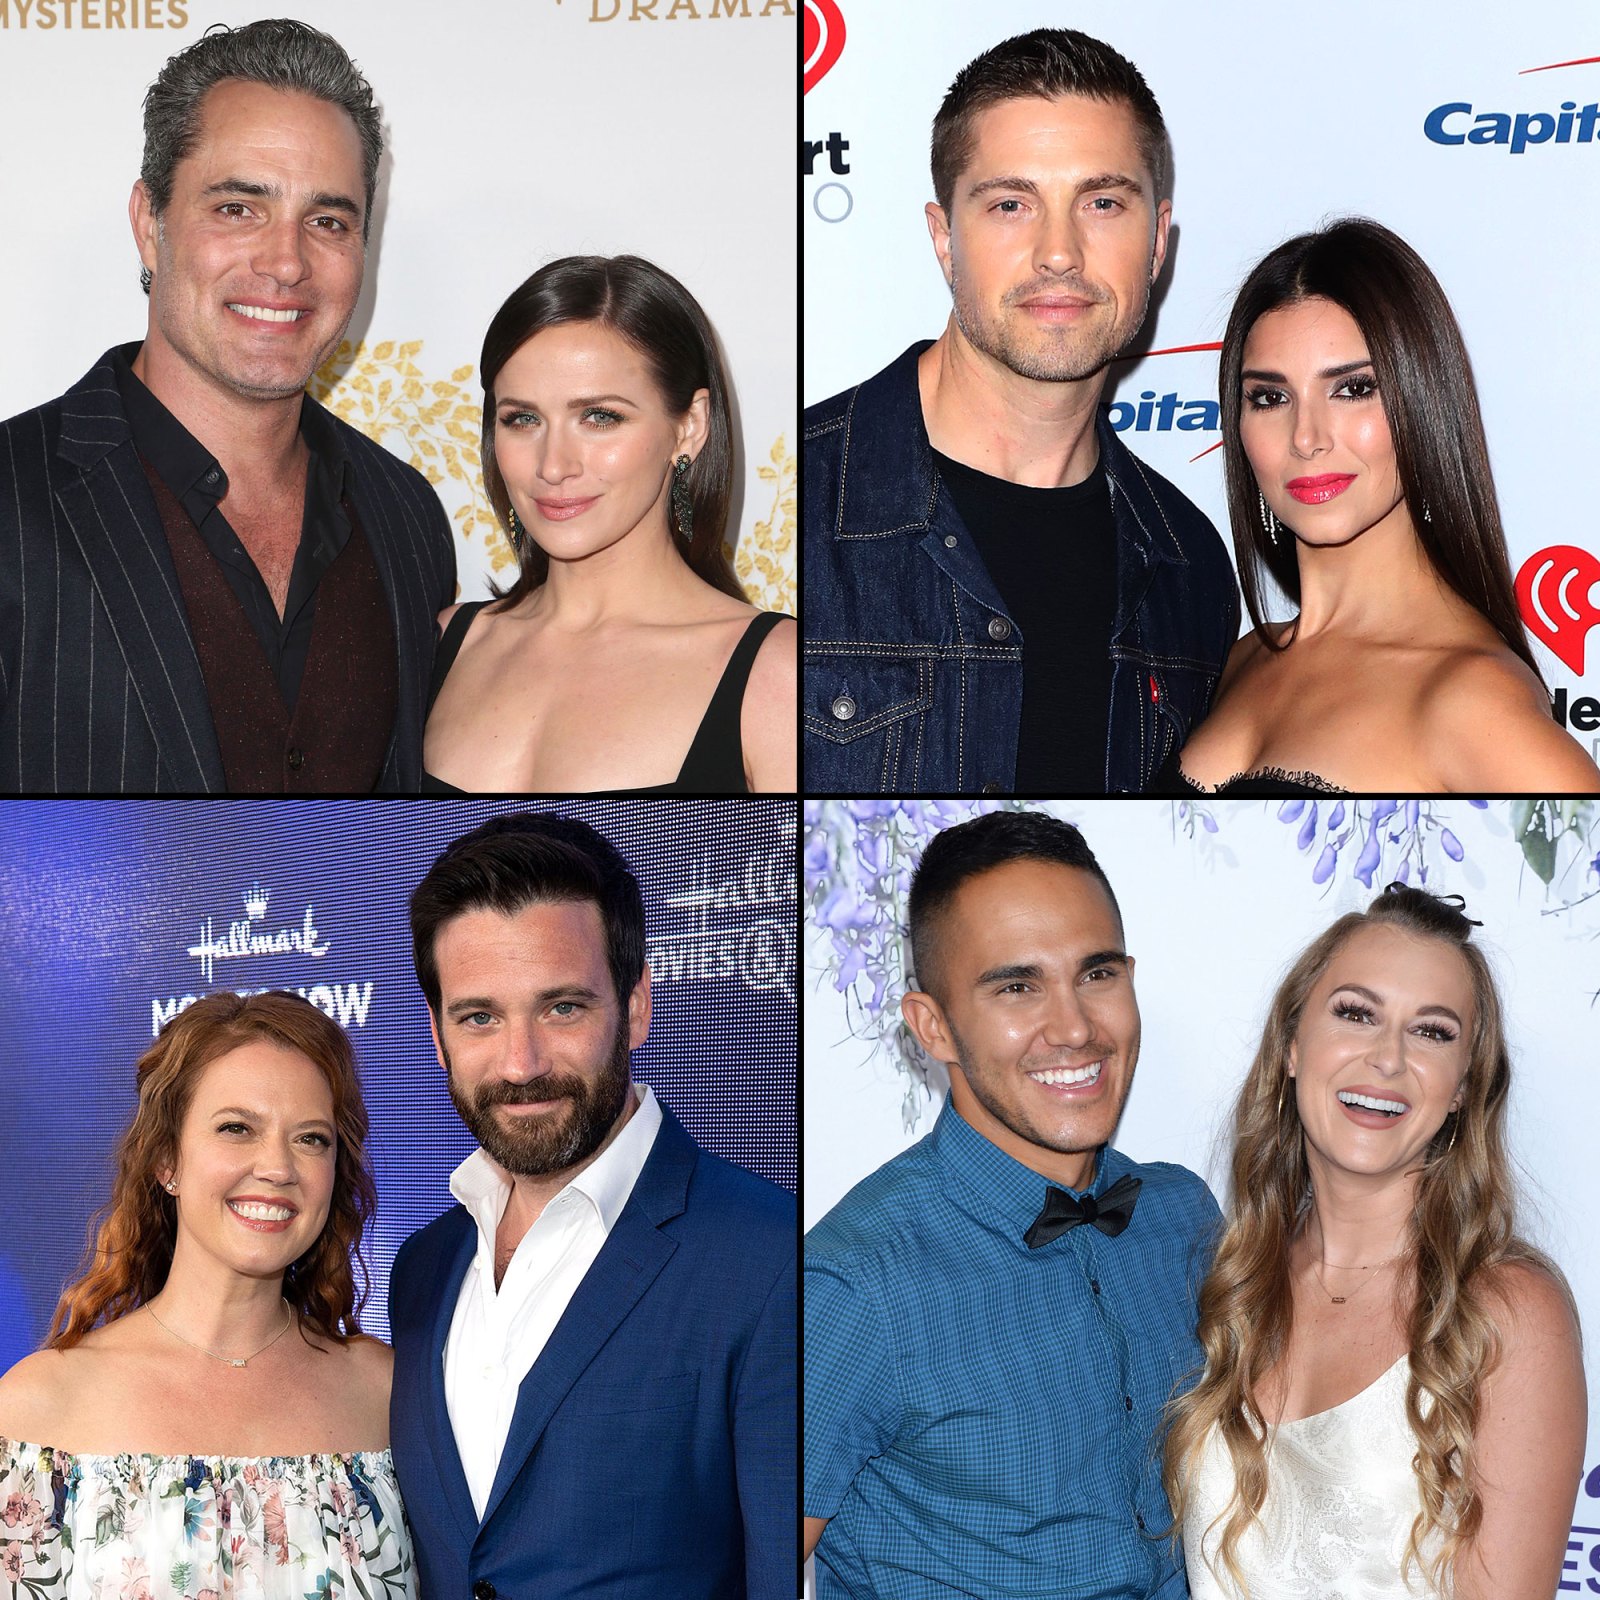 Are any of the hallmark actors and actresses married to each other?